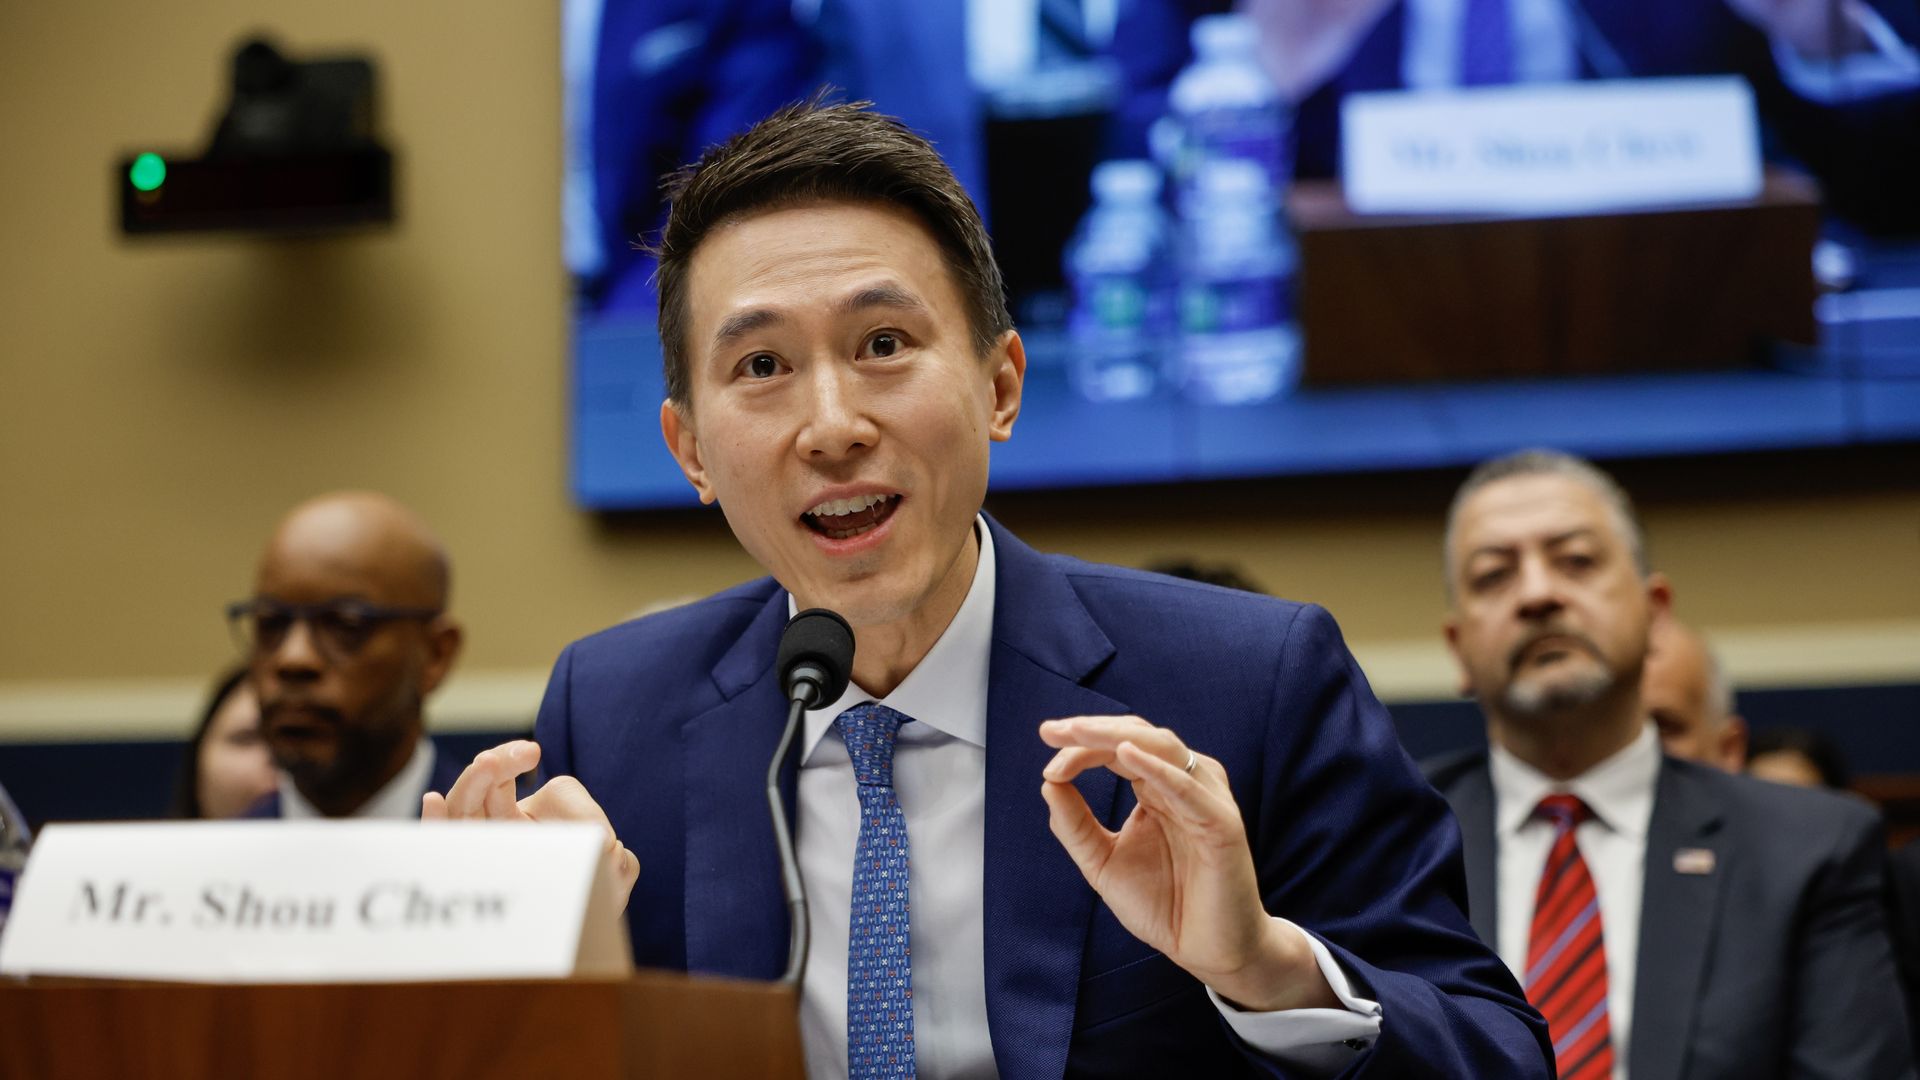 WASHINGTON, DC - MARCH 23: TikTok CEO Shou Zi Chew testifies before the House Energy and Commerce Committee in the Rayburn House Office Building on Capitol Hill on March 23, 2023 in Washington, DC.